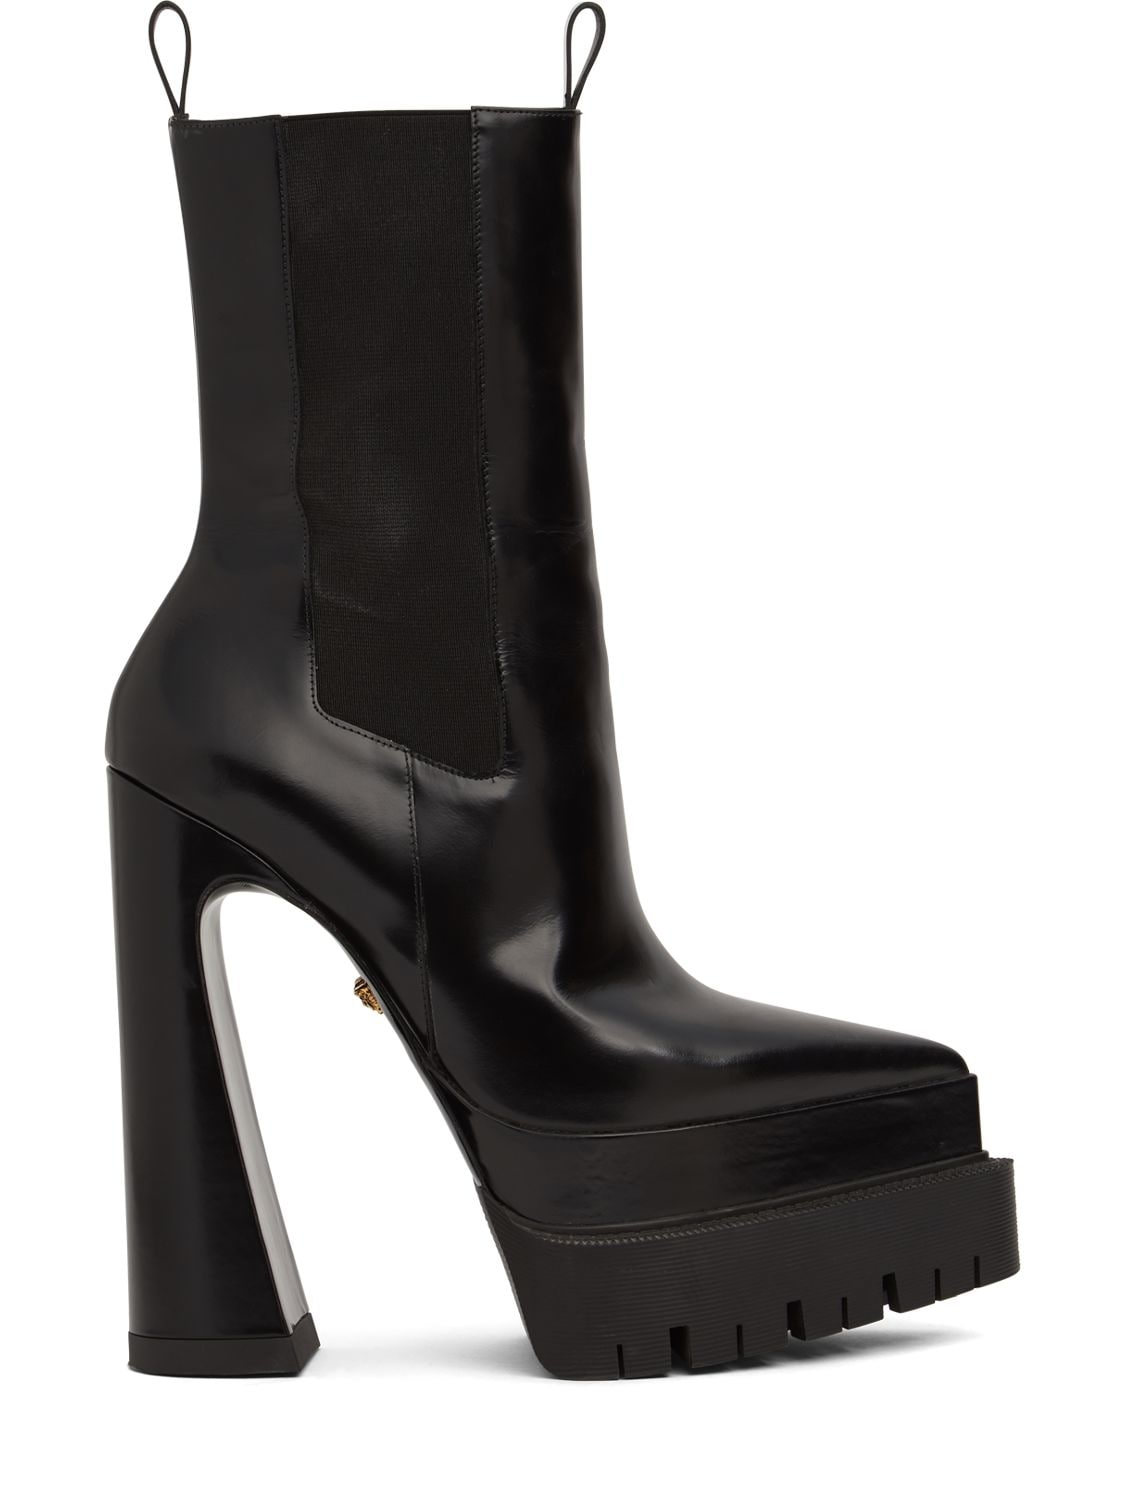 VERSACE 160mm Leather Platform Ankle Boots